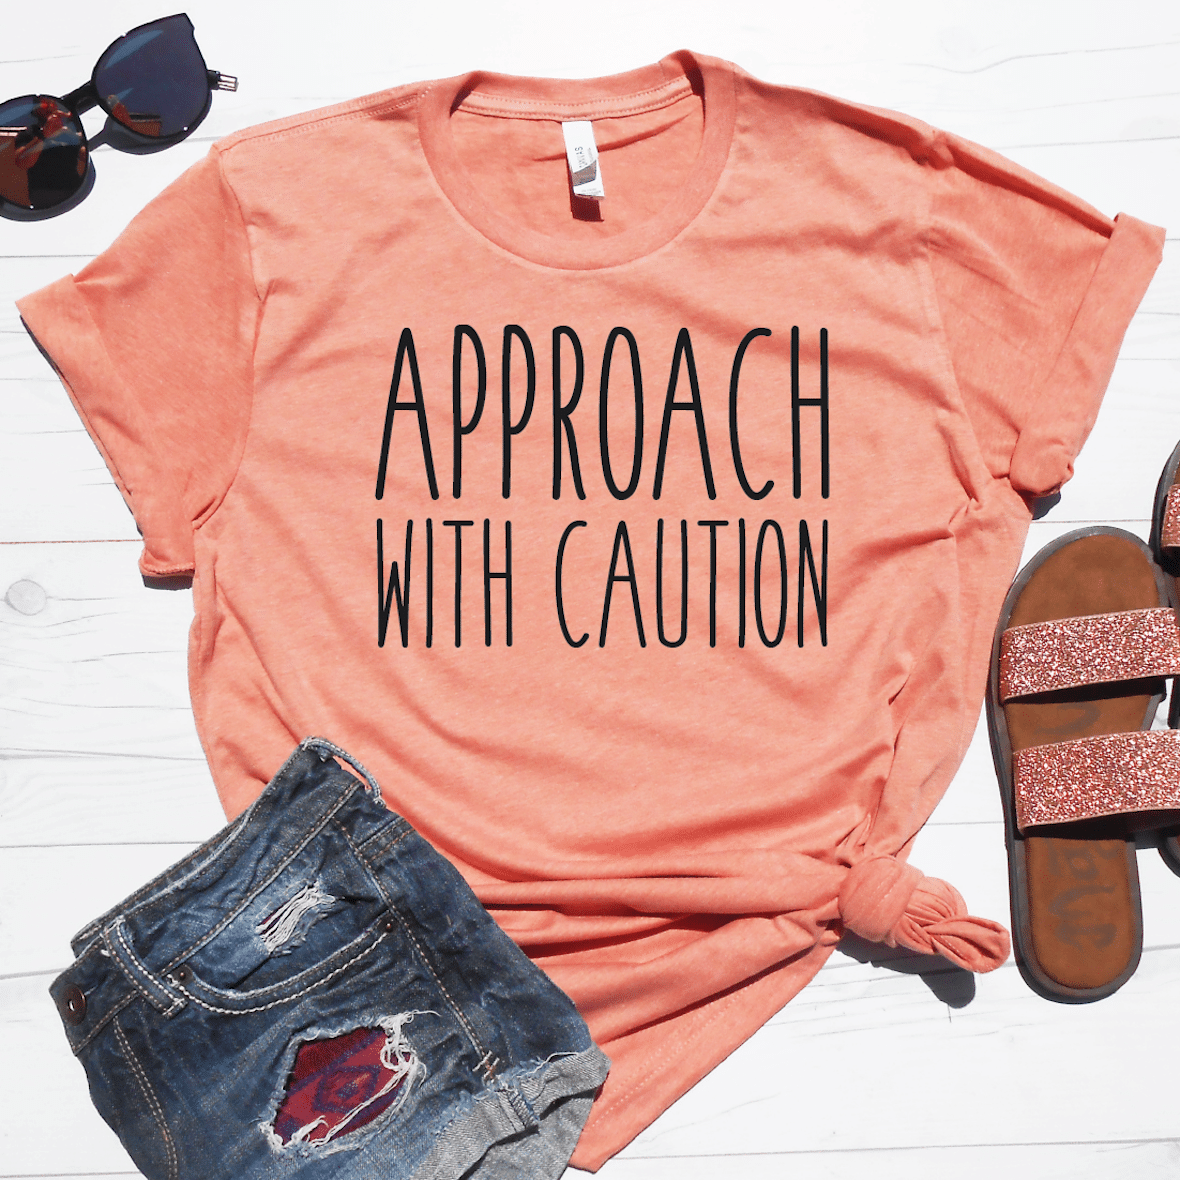 Approach With Caution Shirt - StrongGirlClothing